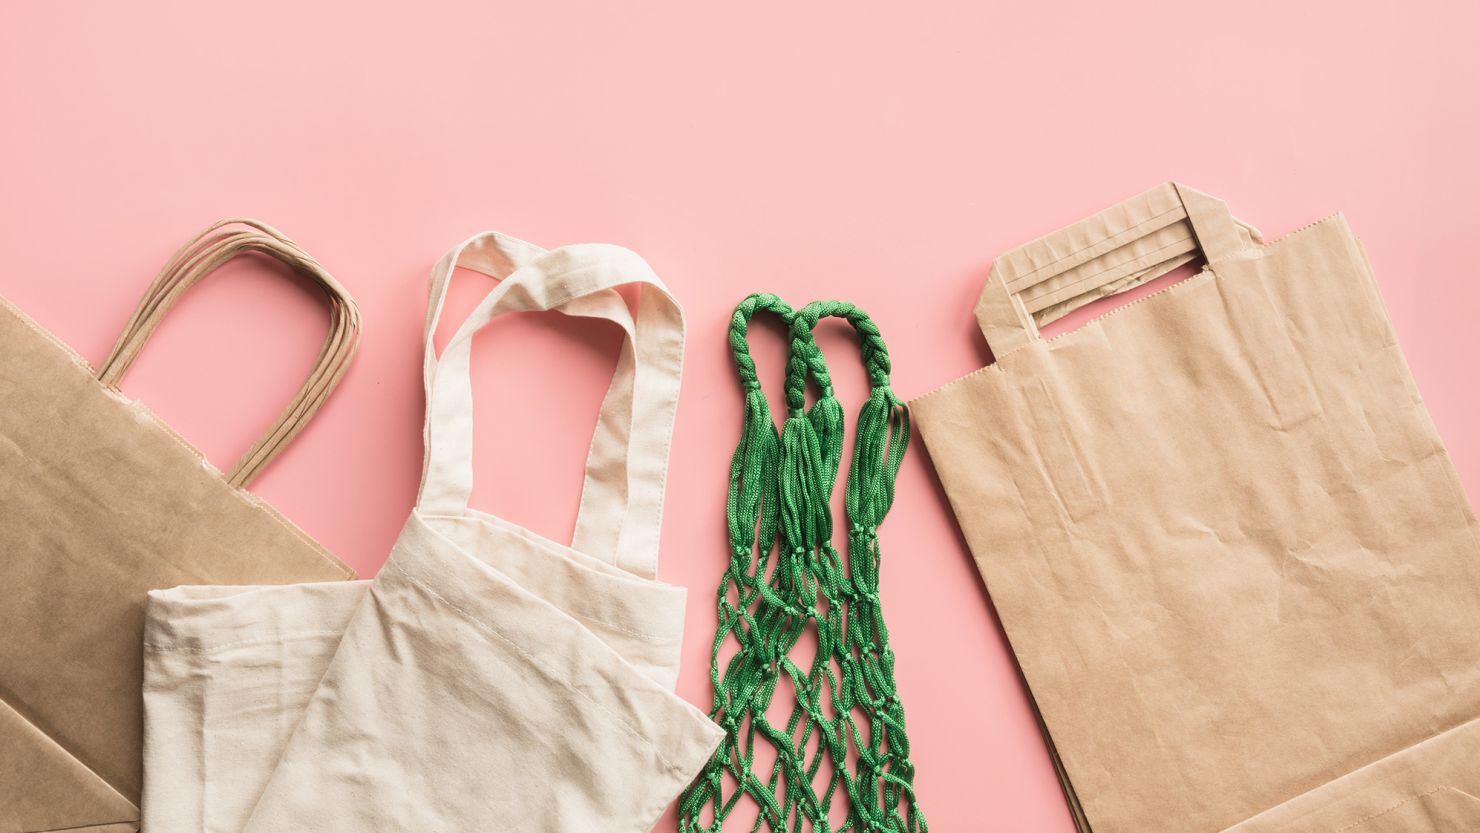 The answer to what's the greenest replacement for a single-use plastic bag isn't straightforward, but the advice boils down to this: Reuse whatever bags you have at home, as many times as you can. 